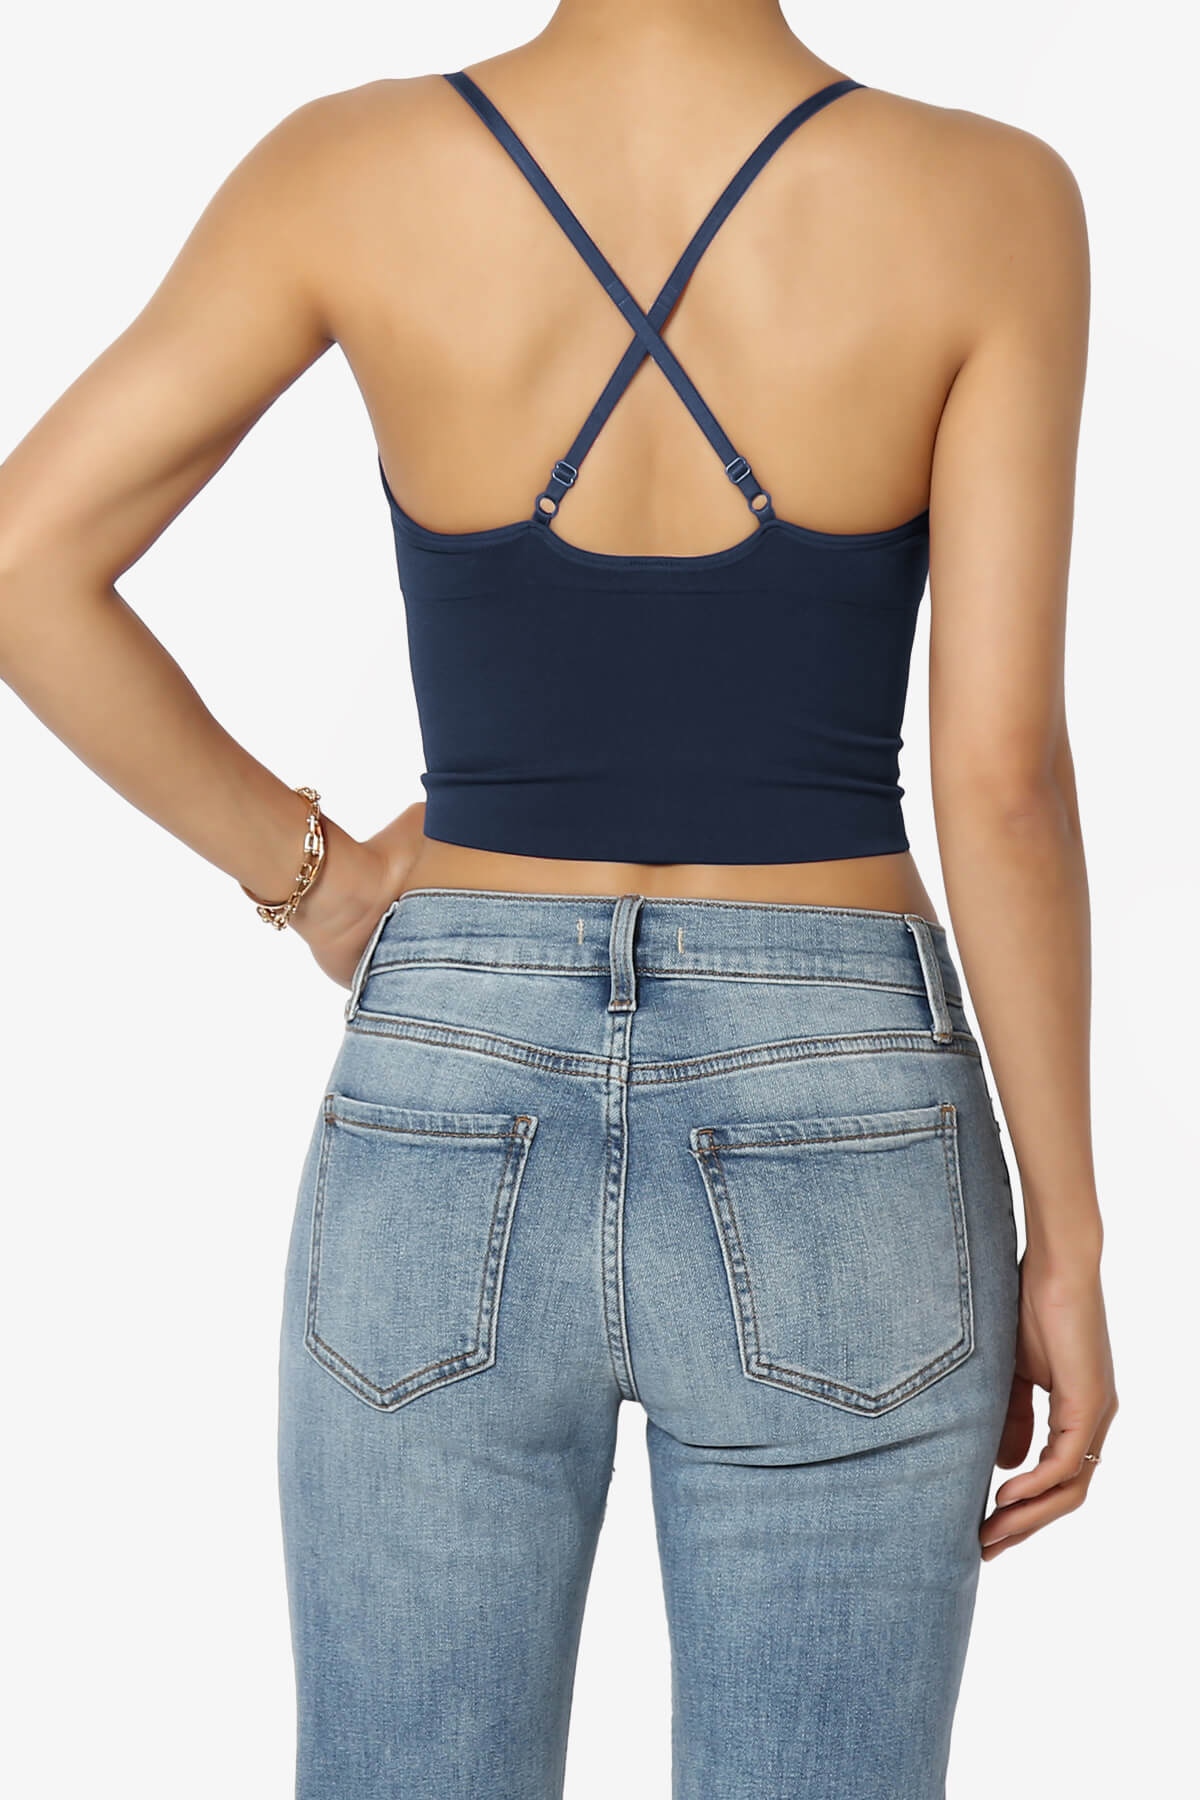 Load image into Gallery viewer, Melena Cross Back Triangle V-Neck Crop Cami NAVY_2
